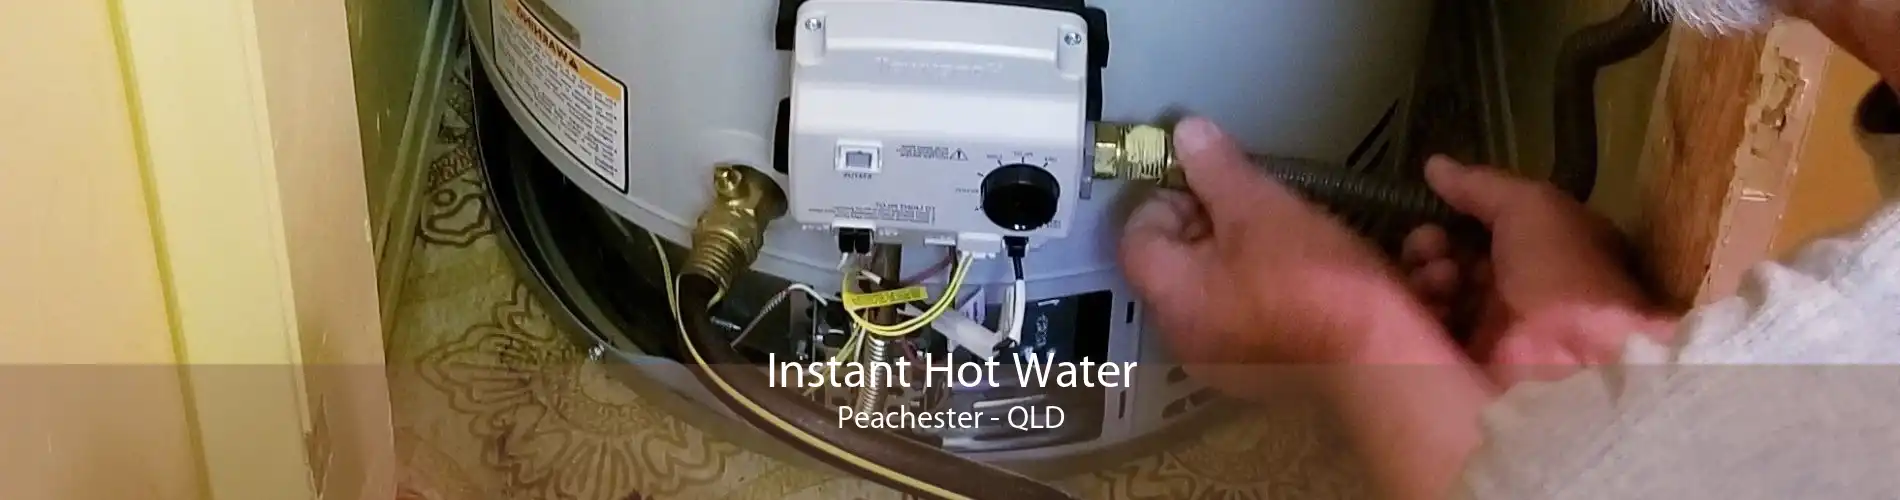 Instant Hot Water Peachester - QLD